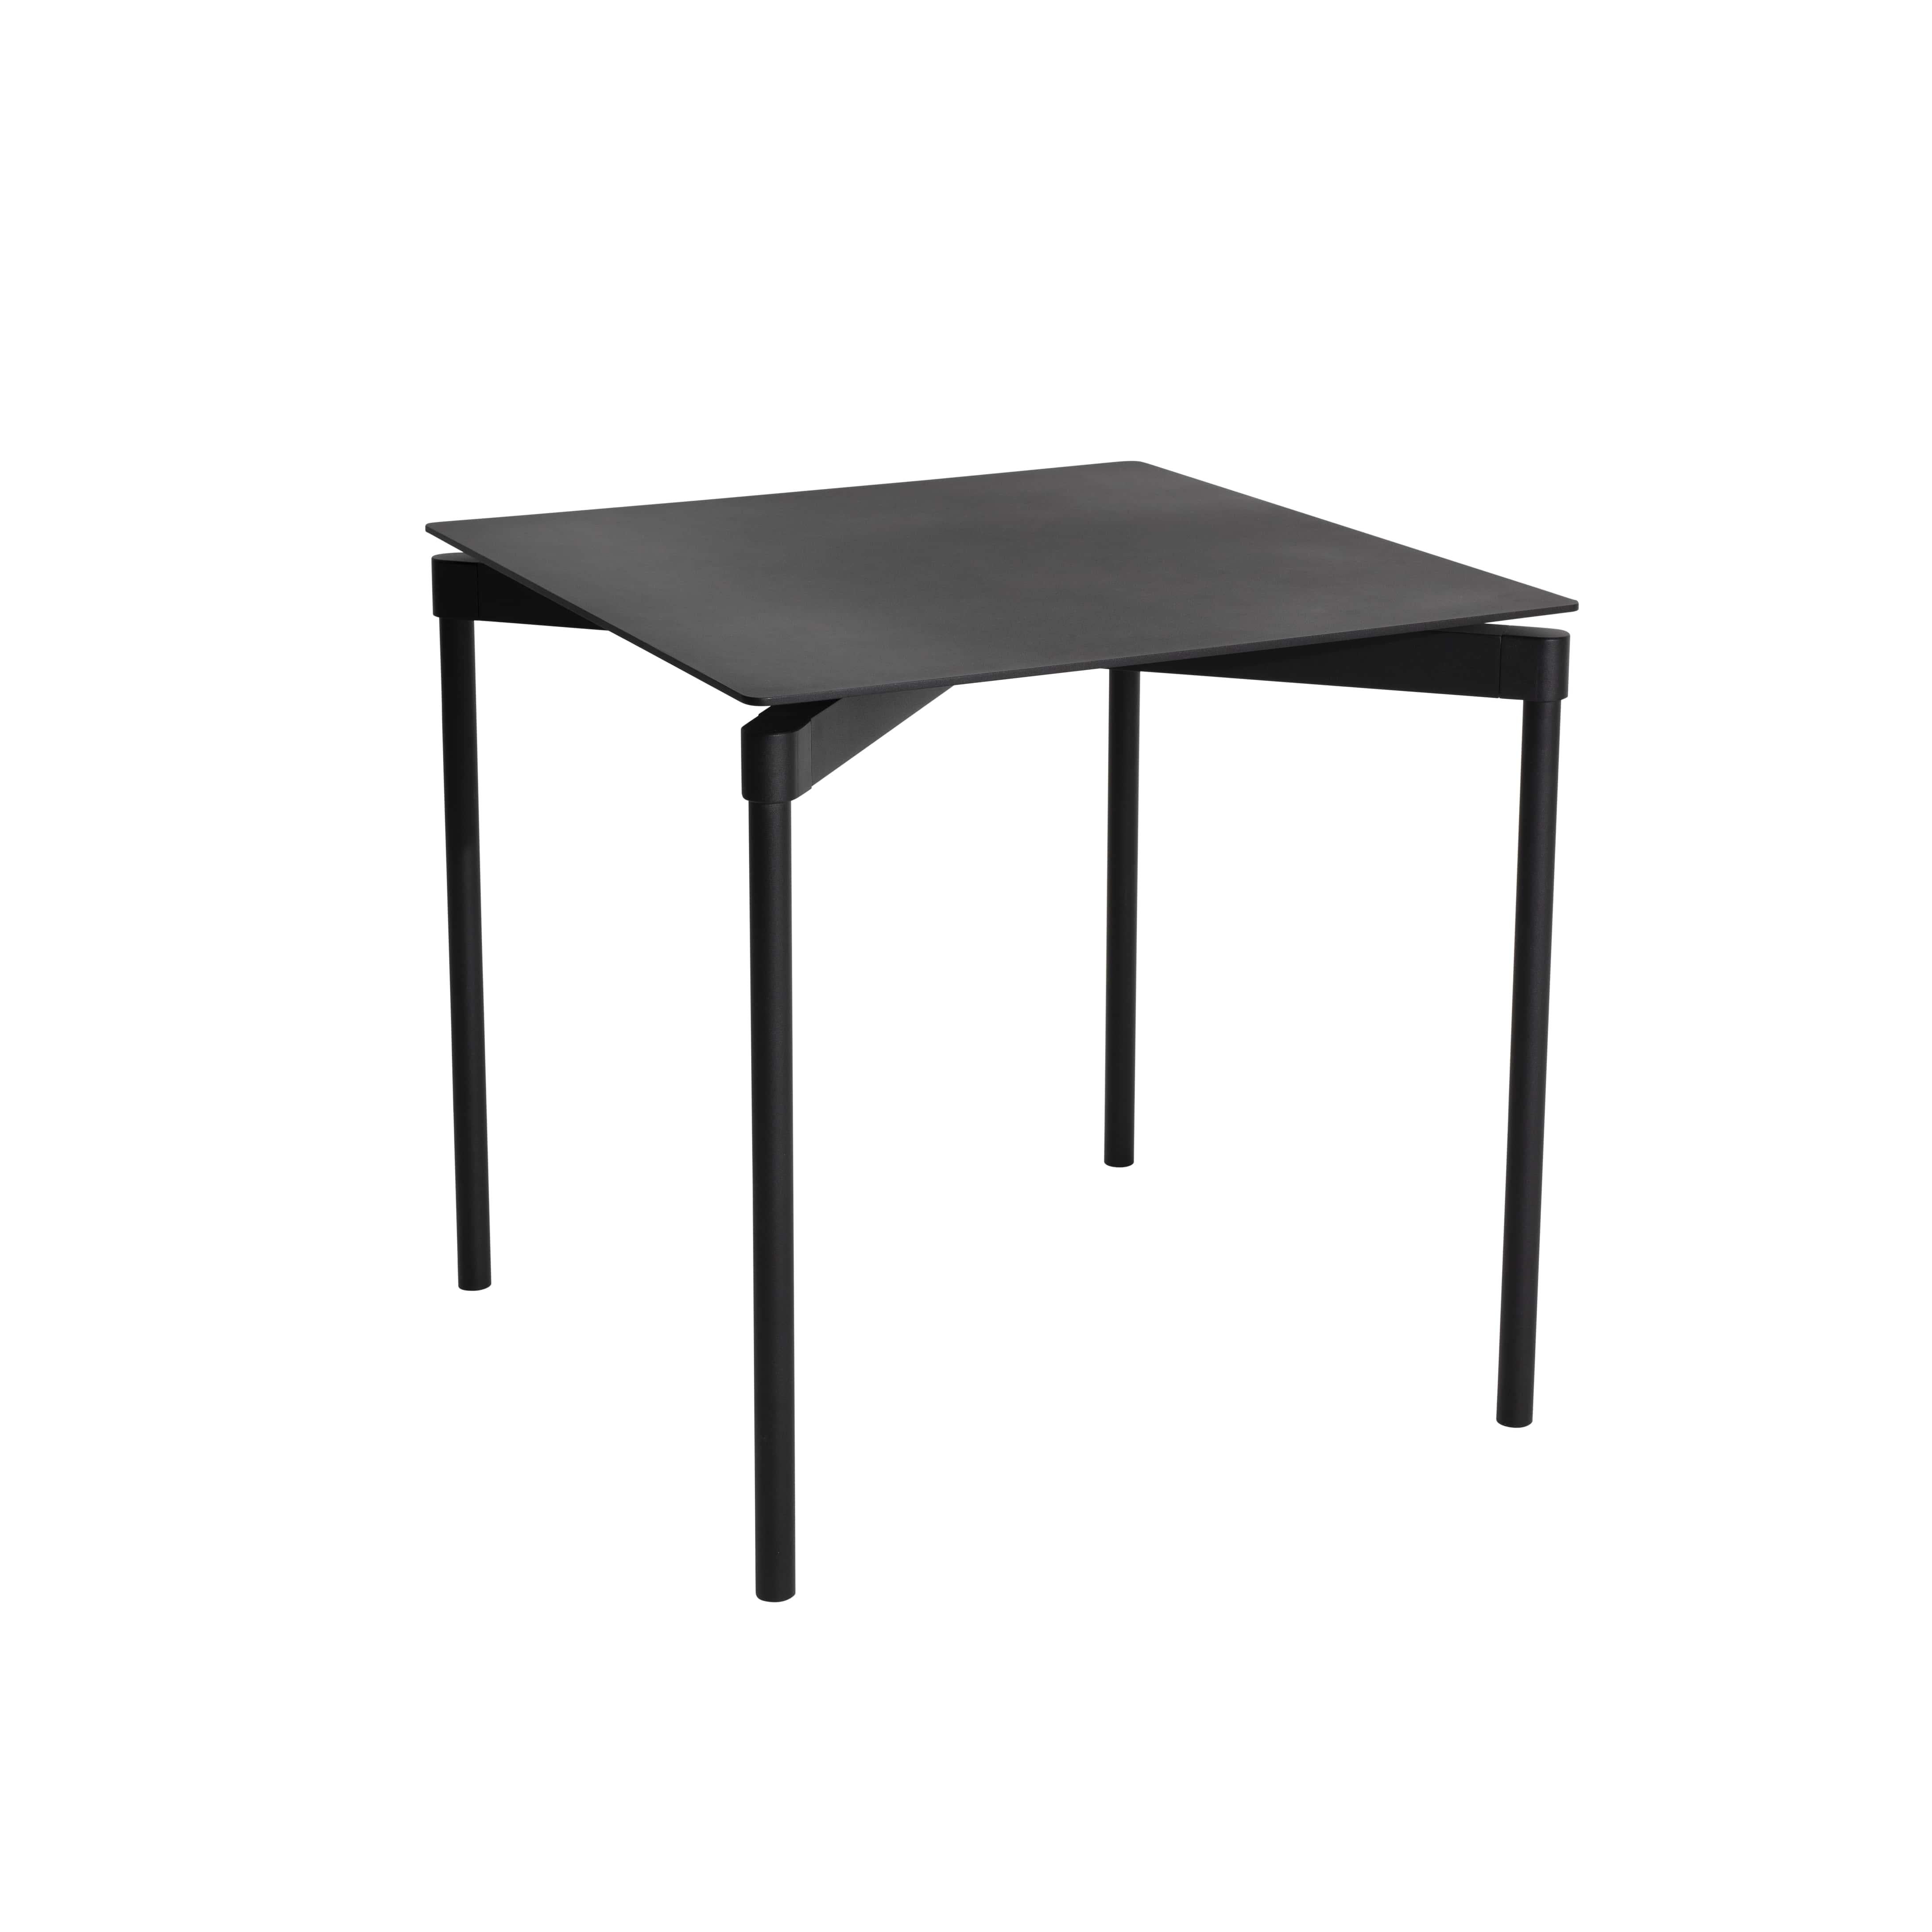 Petite Friture Fromme Square Table in Black Aluminium by Tom Chung, 2020

The Fromme collection stands out by its pure line and compact design. Absorbers placed under the seating gives a soft and very comfortable flexibility to seats. Made from